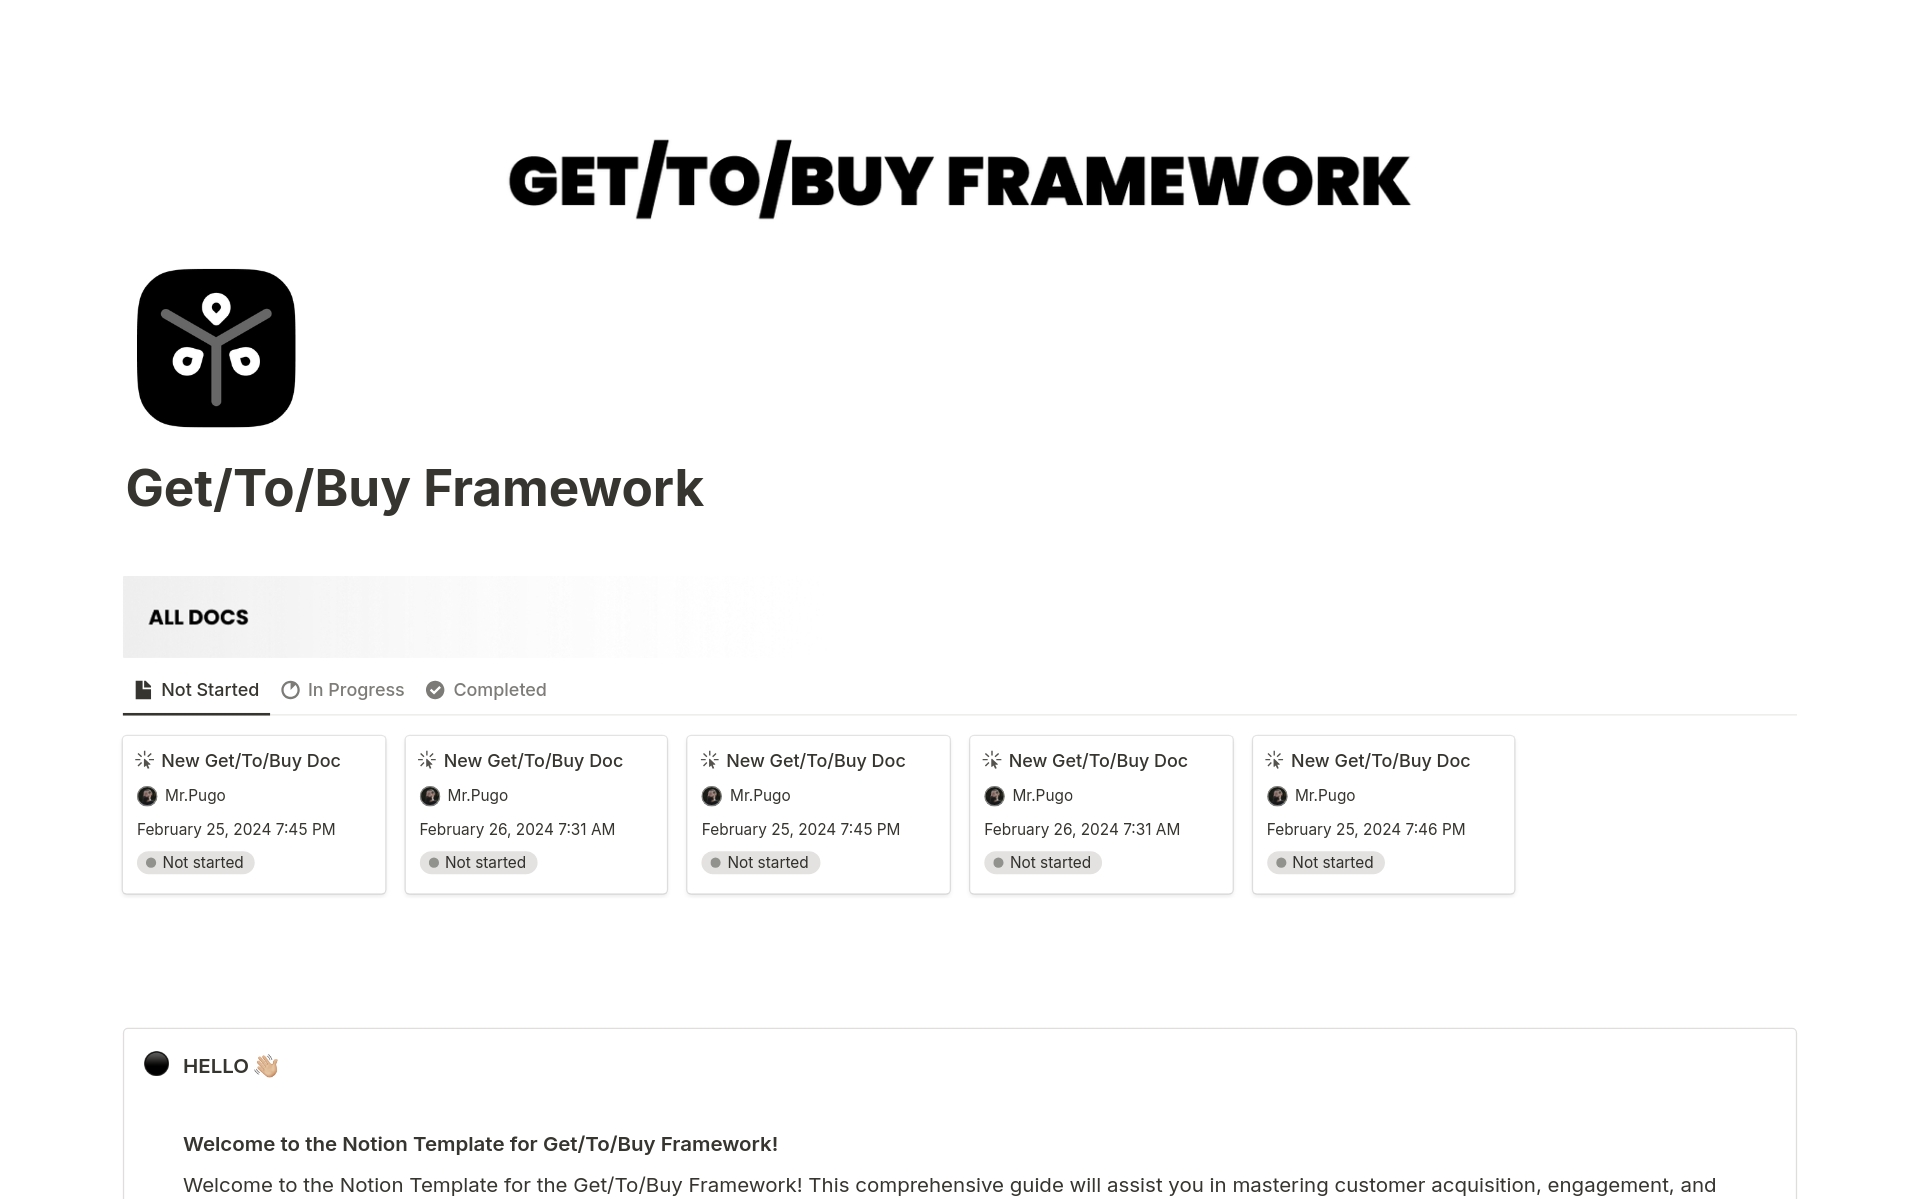 Winning Customers Made Easy with the Get/To/Buy Framework.